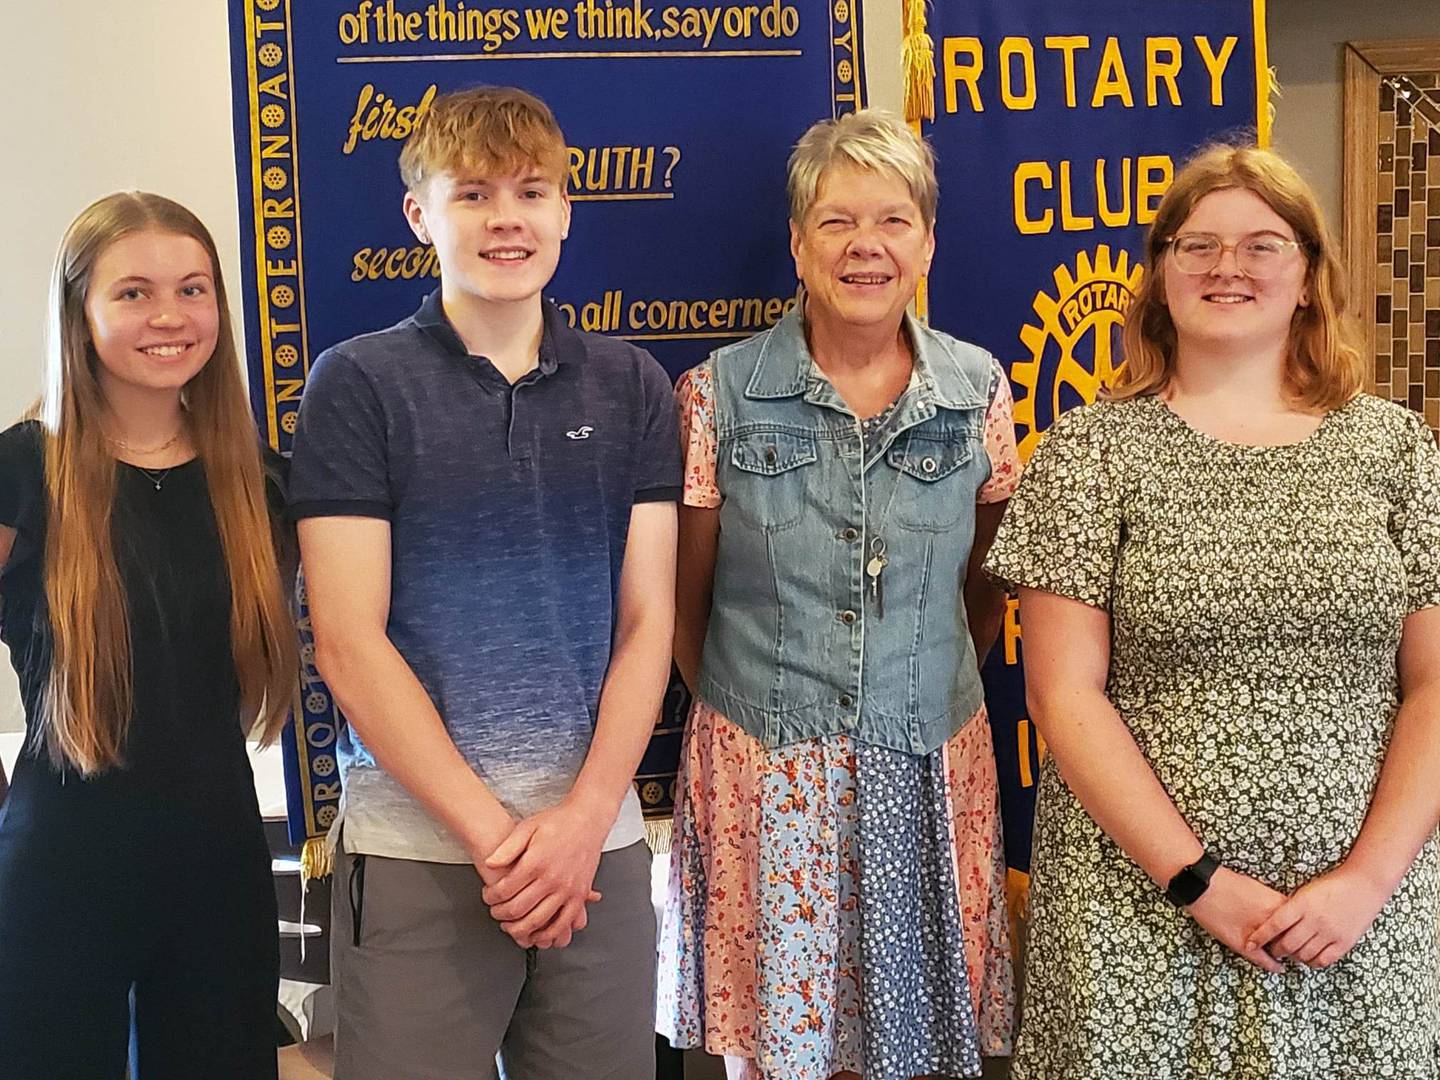 2023 Princeton Rotary Scholarship recipients include (L-R) Lily Keutzer, Kyle Jaeger and Kailey Patterson. Scholarship Committee Member Joanne Sheldon is also pictured, second from the right.